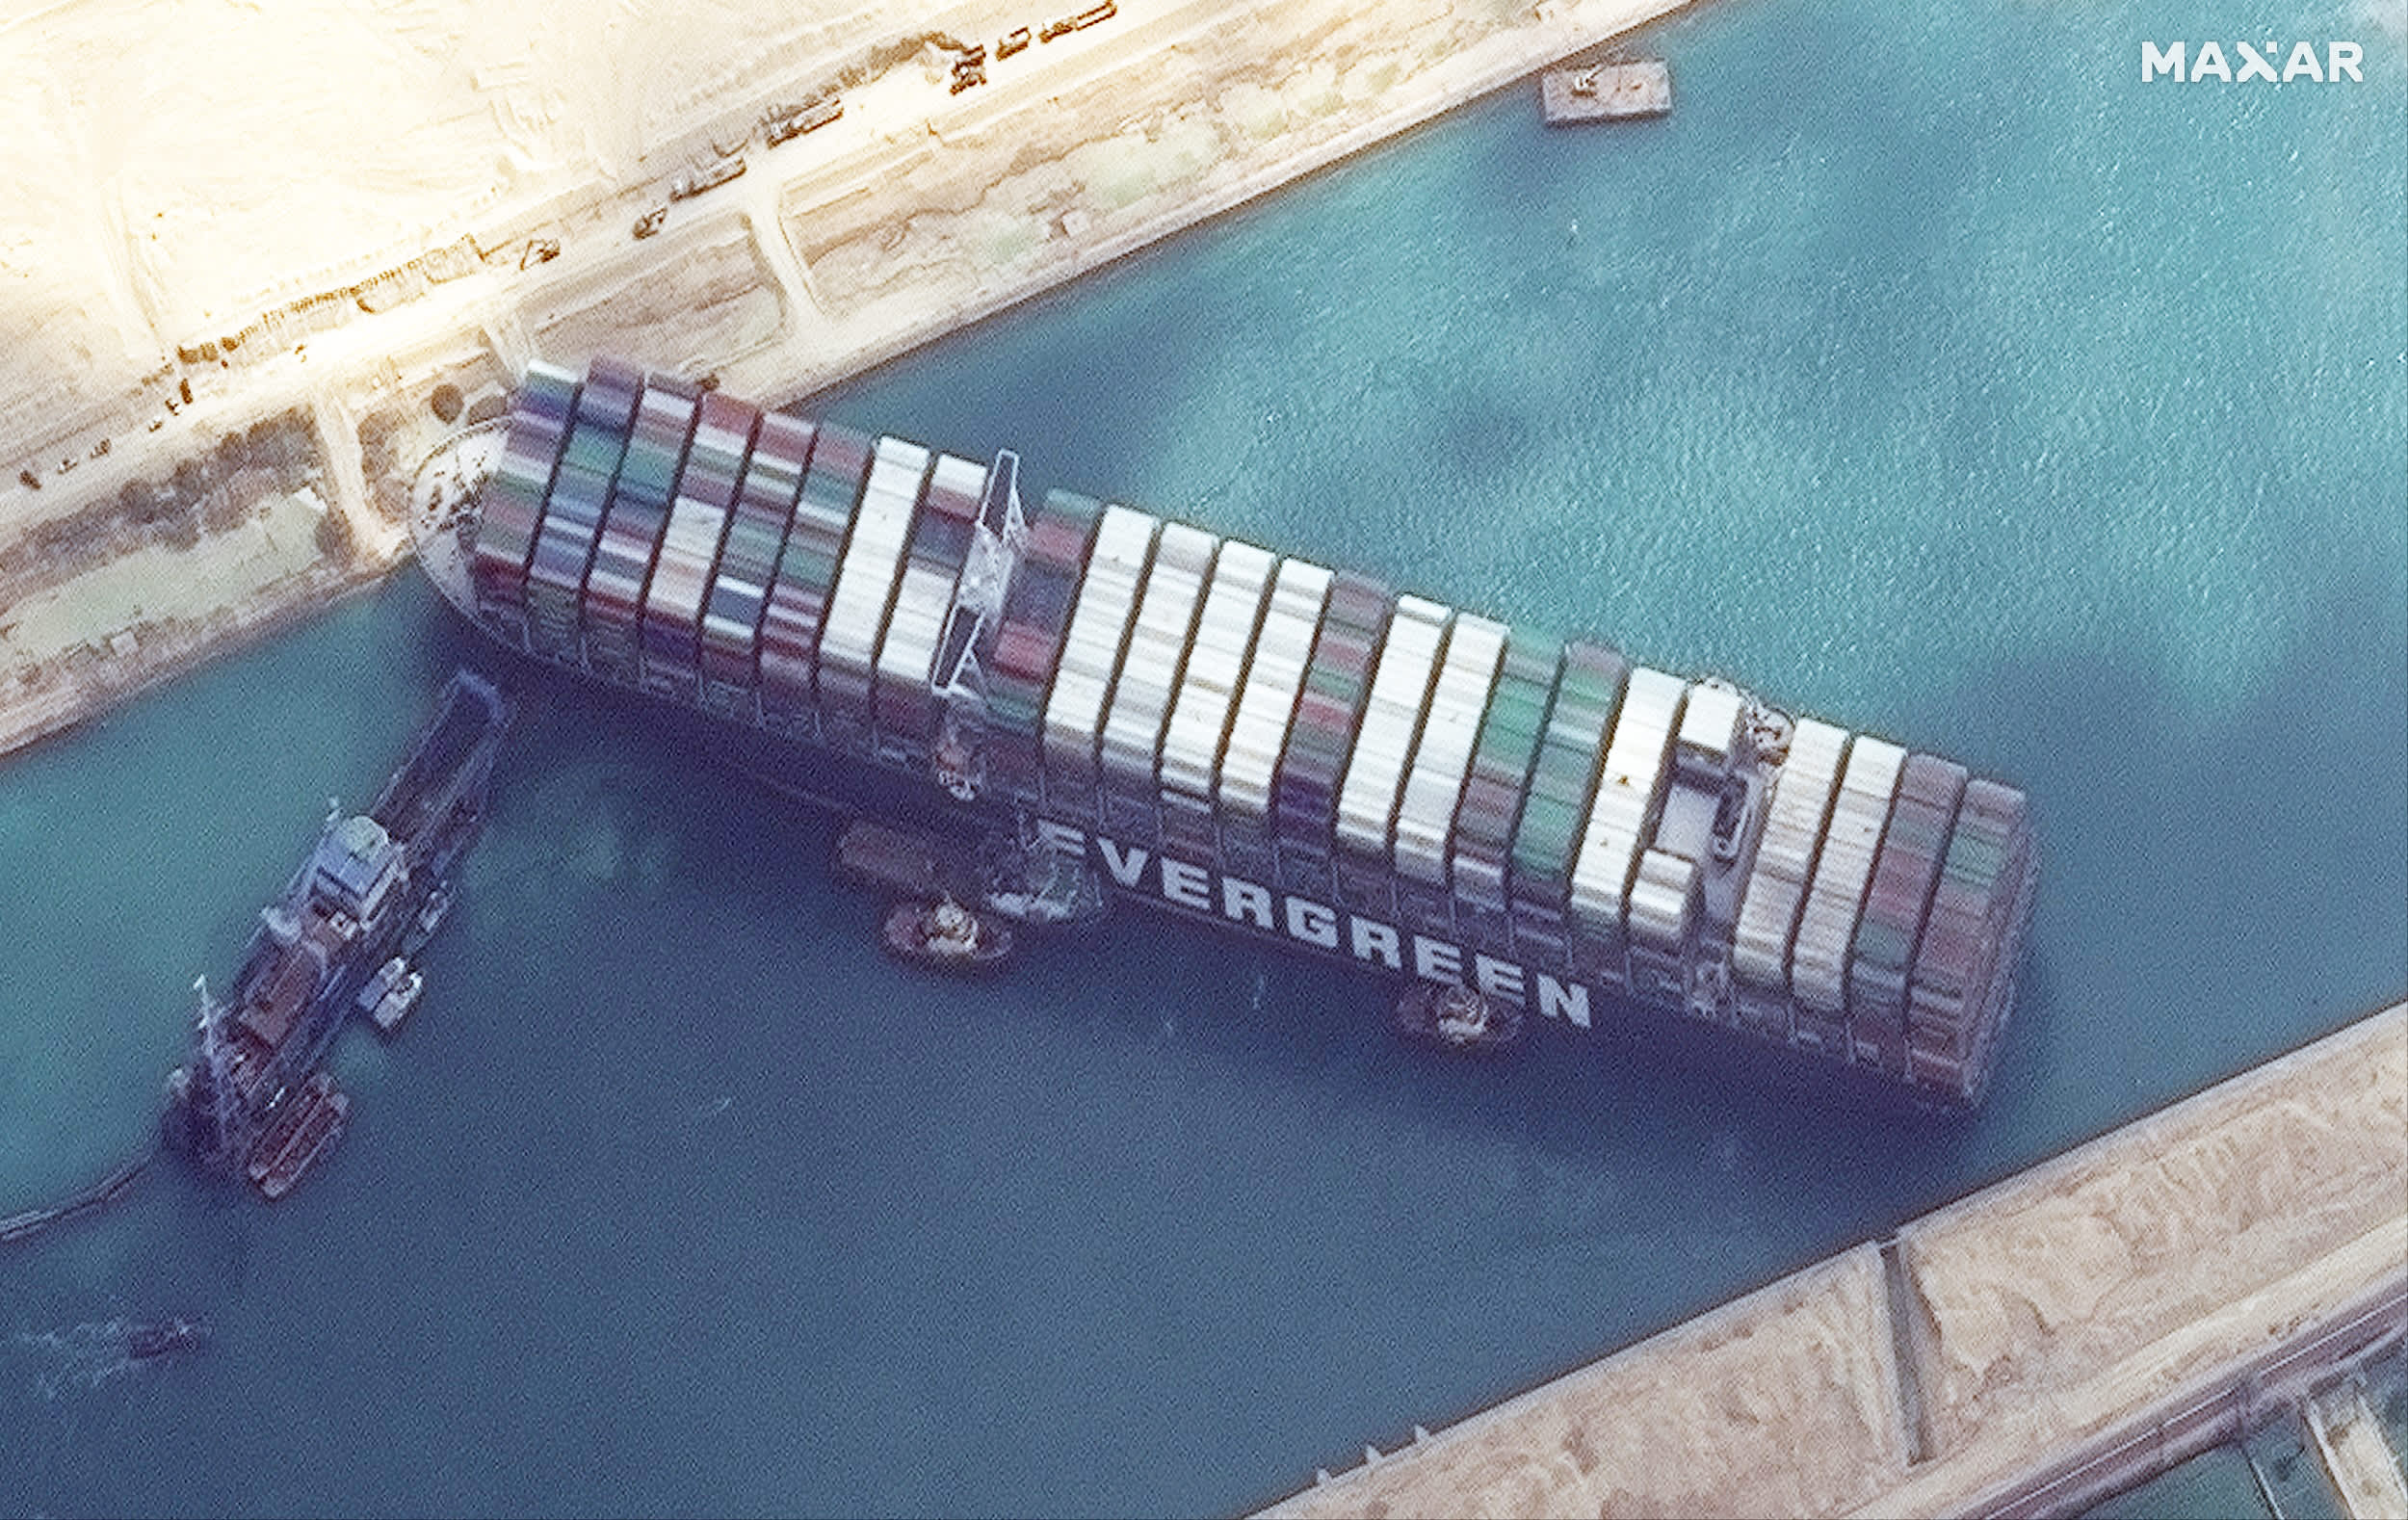 Satellite imagery shows work underway to free ship Ever Given in the